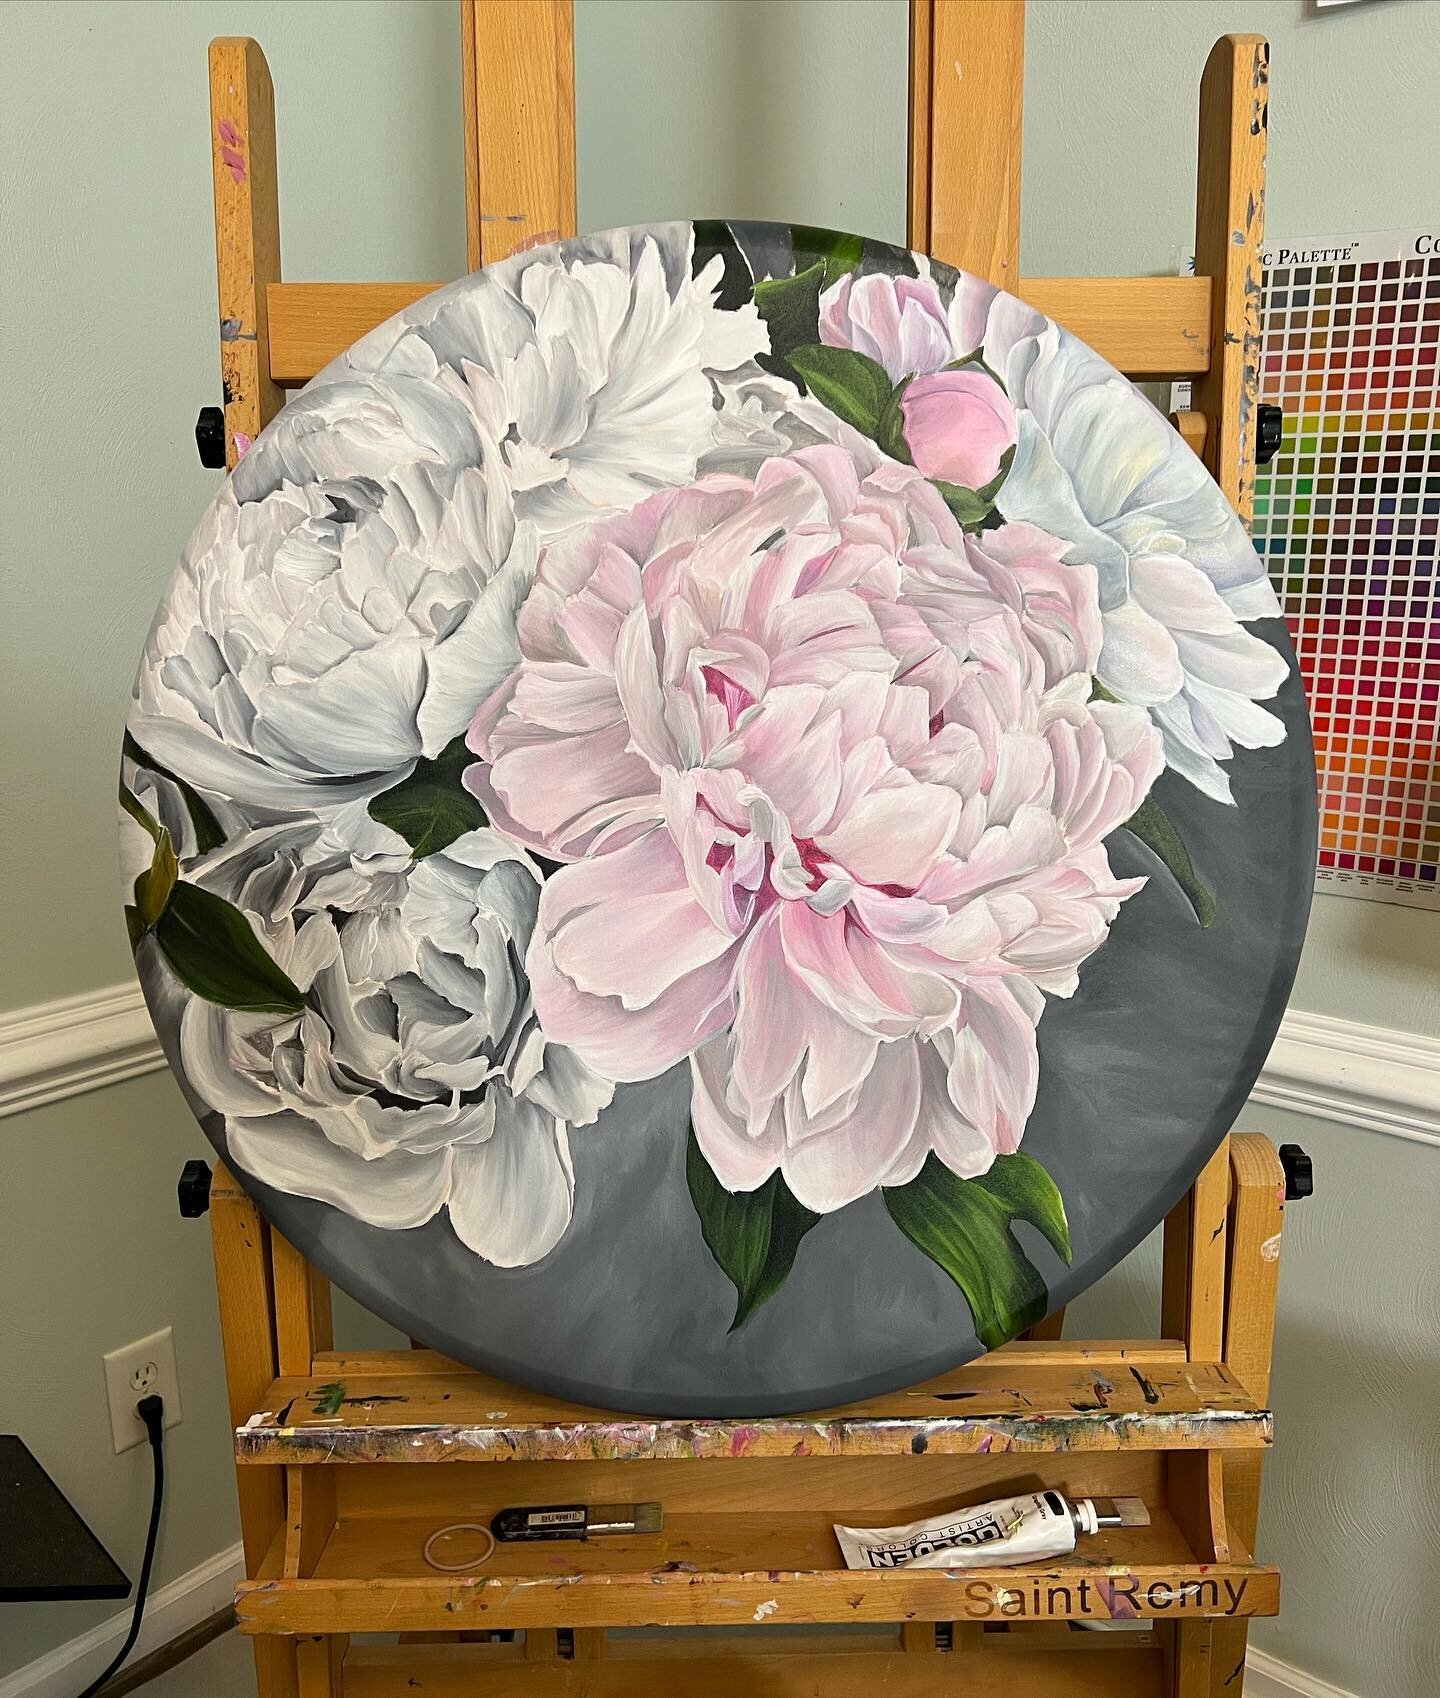 I don&rsquo;t usually post this early in process but thought I&rsquo;d give out a sneak peek. #whosupforaround? #lovemesomepeonies #lawingartstudio #stephlawing